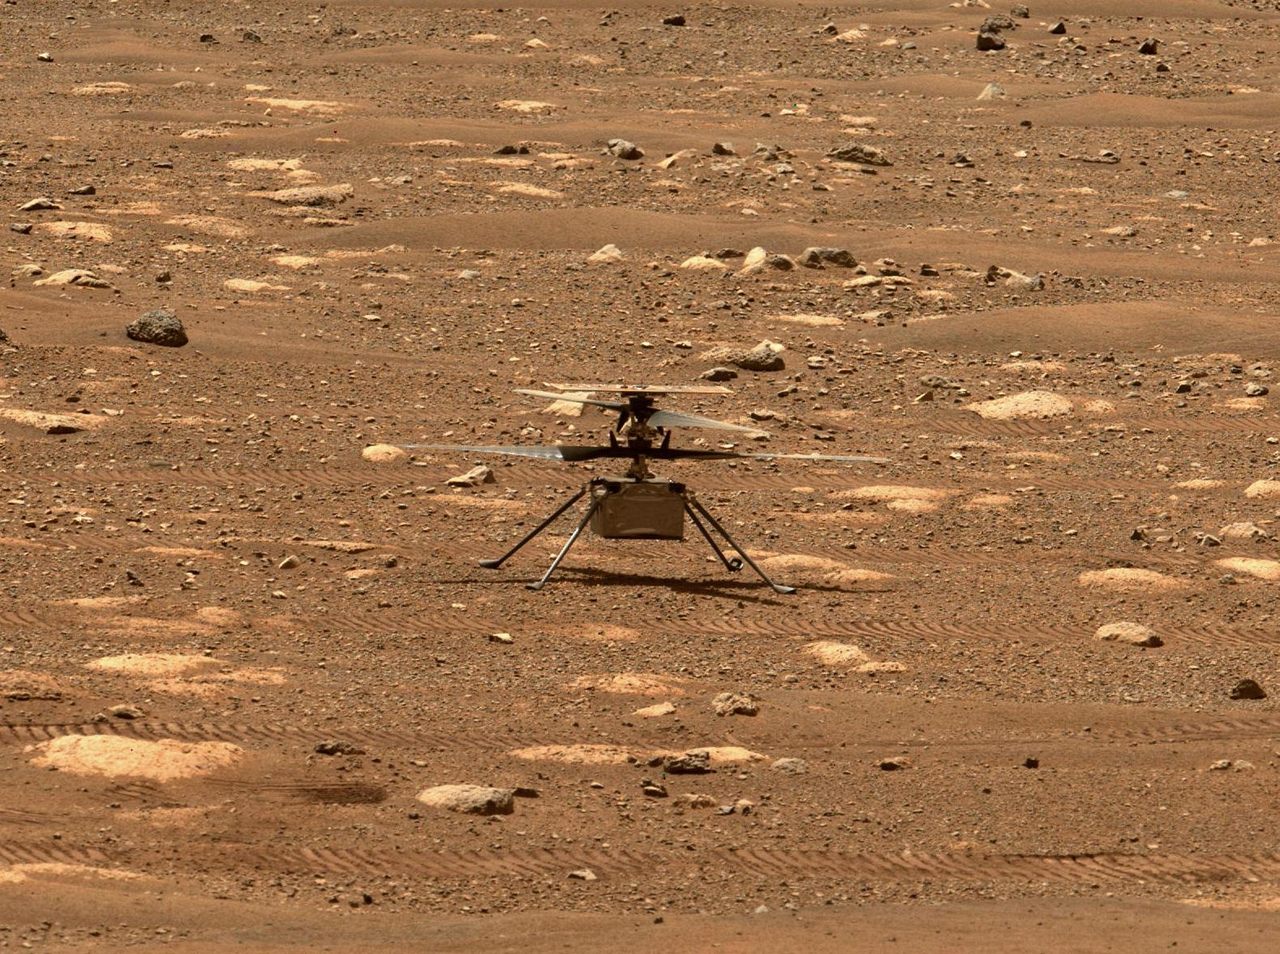 The Ingenuity Mars Helicopter was a test—and a first in the history of aviation